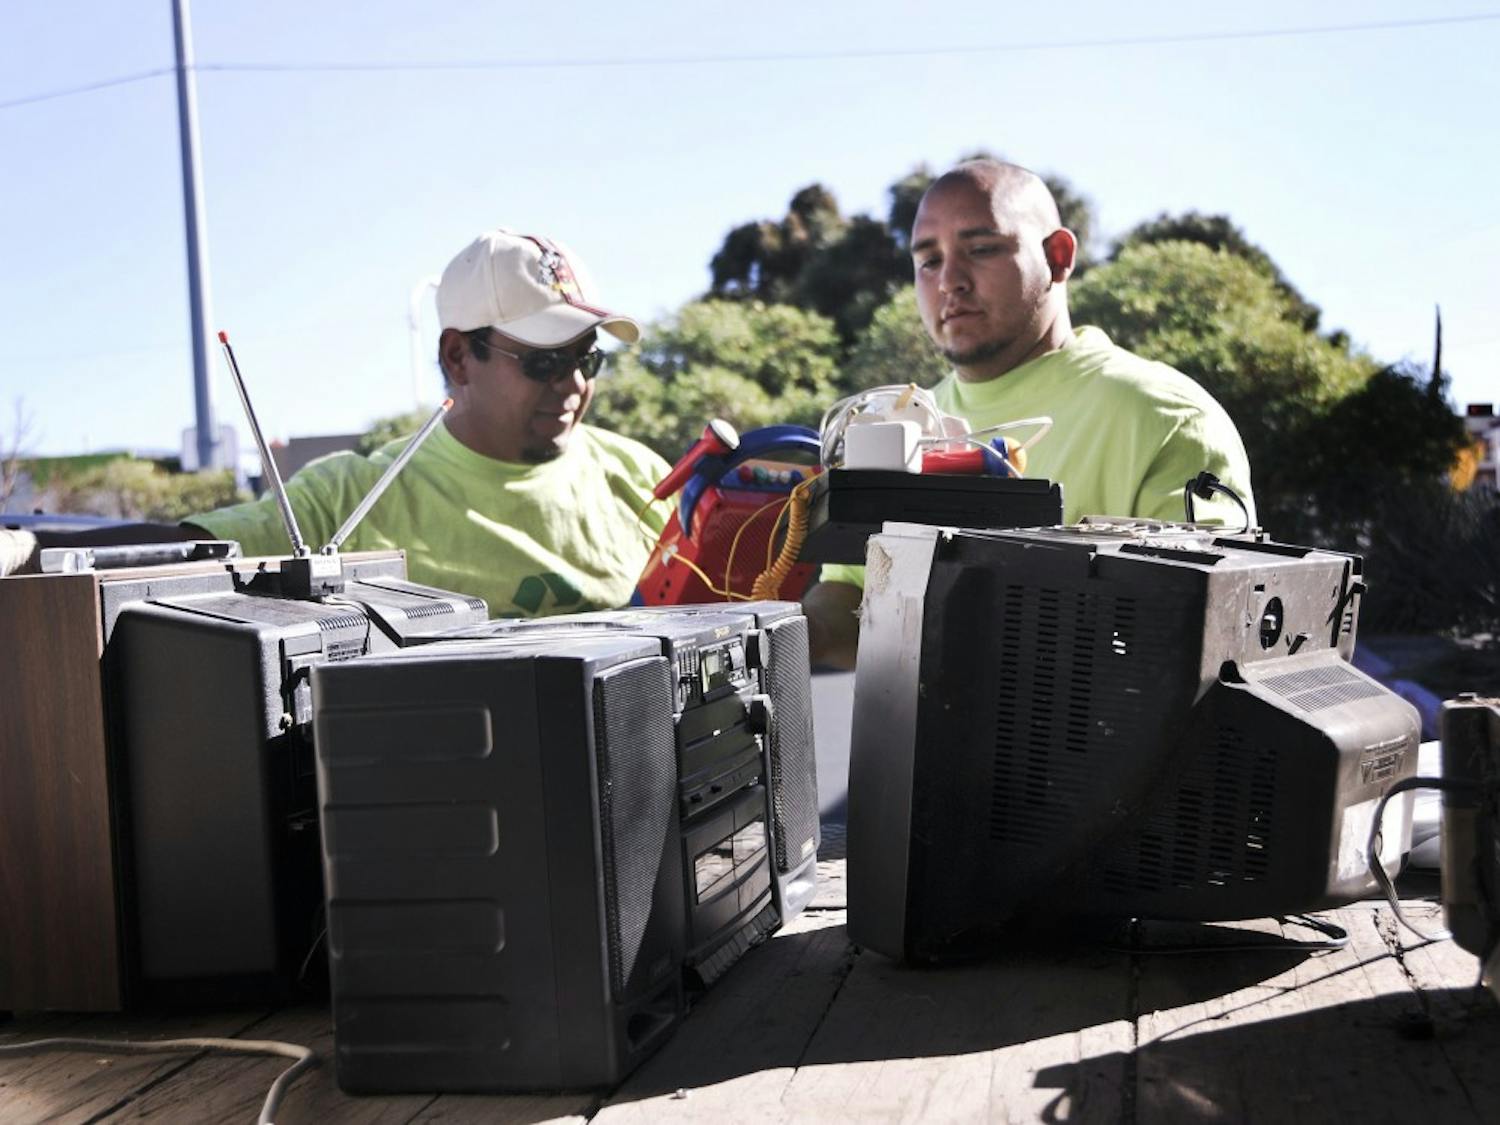 	Jesus Ramirez, left, and Andres Lopez load old TVs and stereos to be recycled in A lot on Saturday. The student group Net Impact is collecting electronic waste for recycling. 